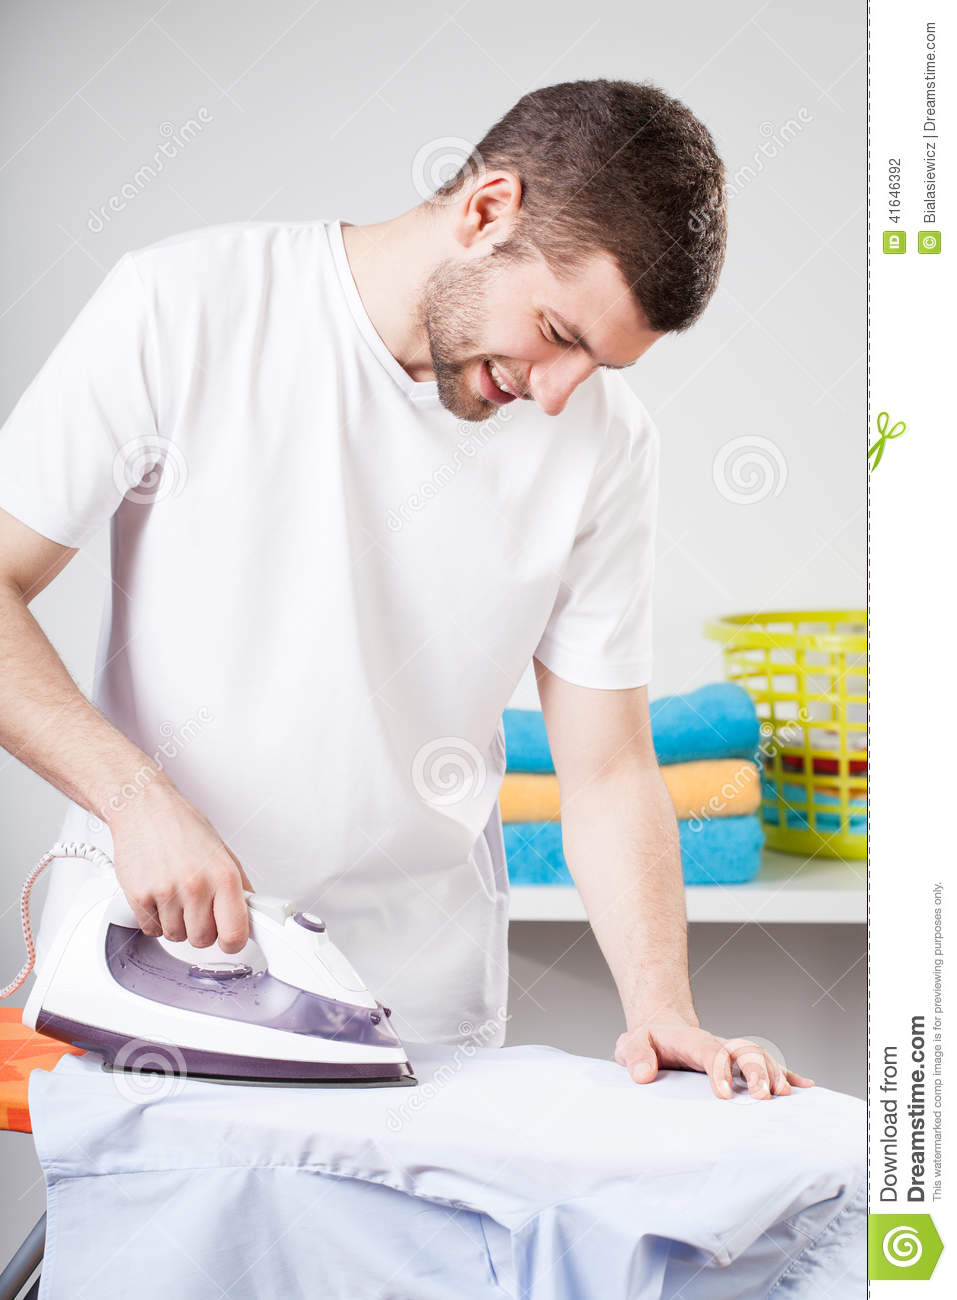 man-doing-household-chores-handsome-ironing-as-his-chore-41646392.jpg